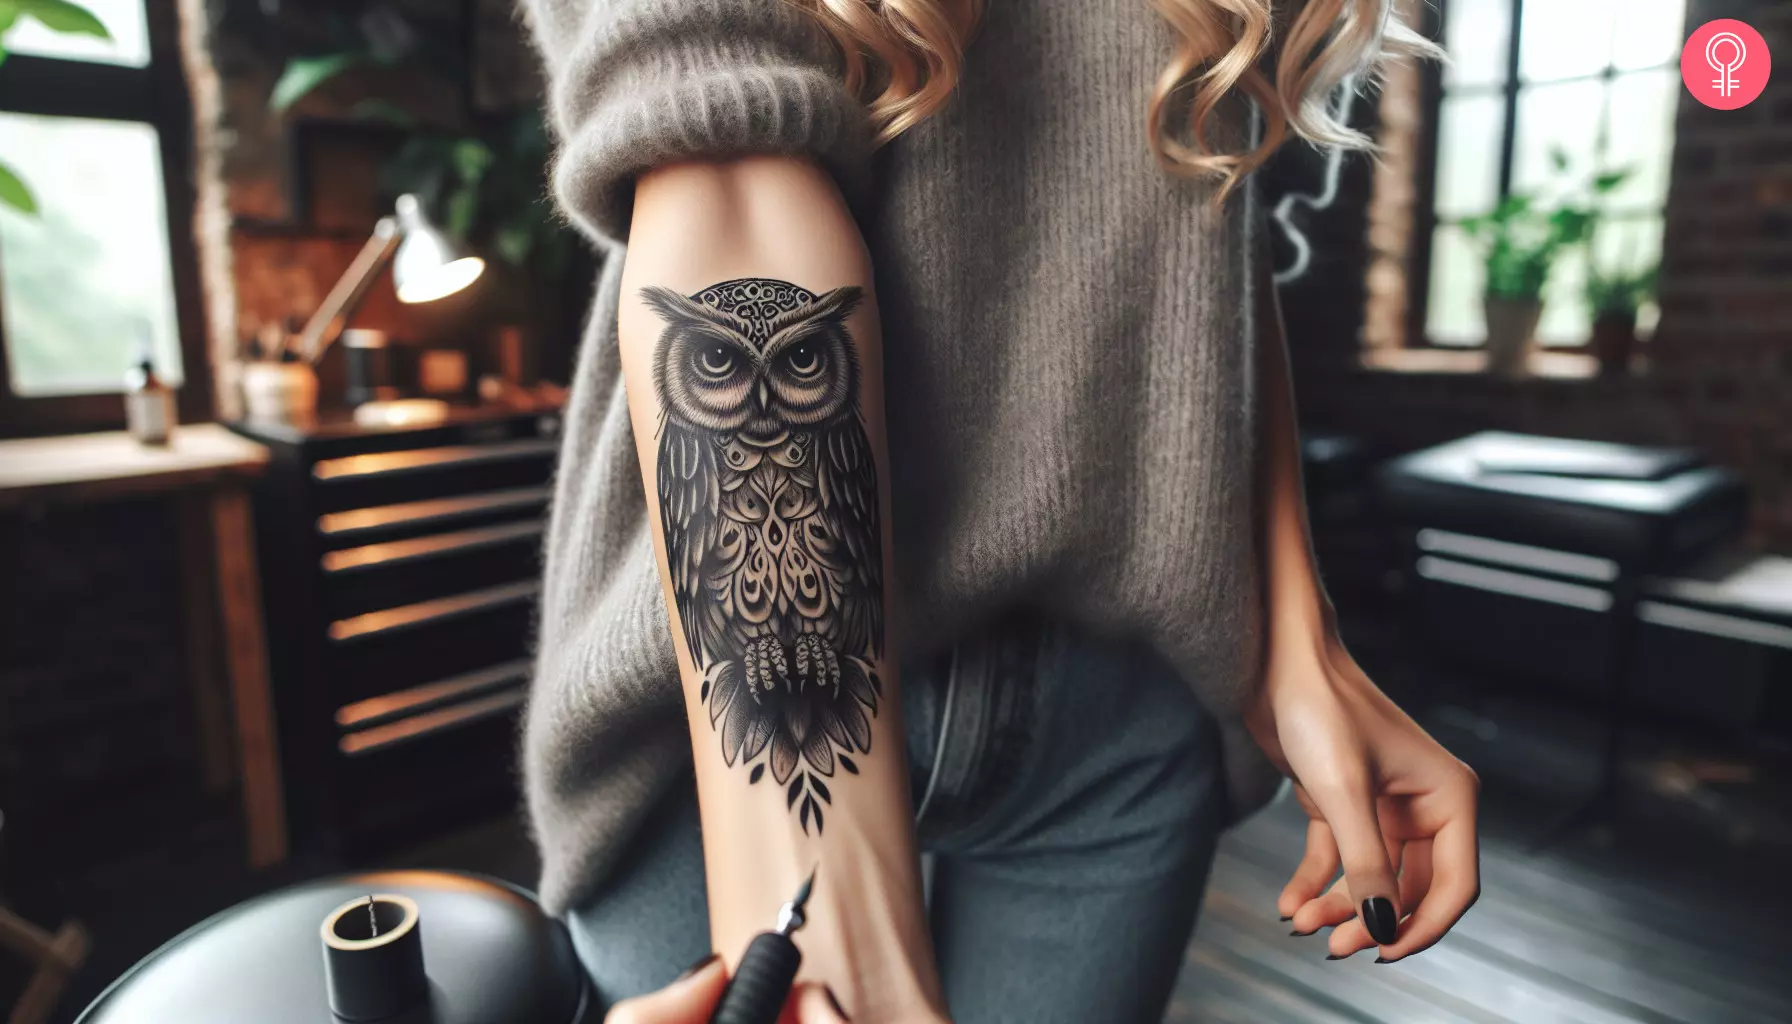 Owl tattoo design on the forearm of a woman